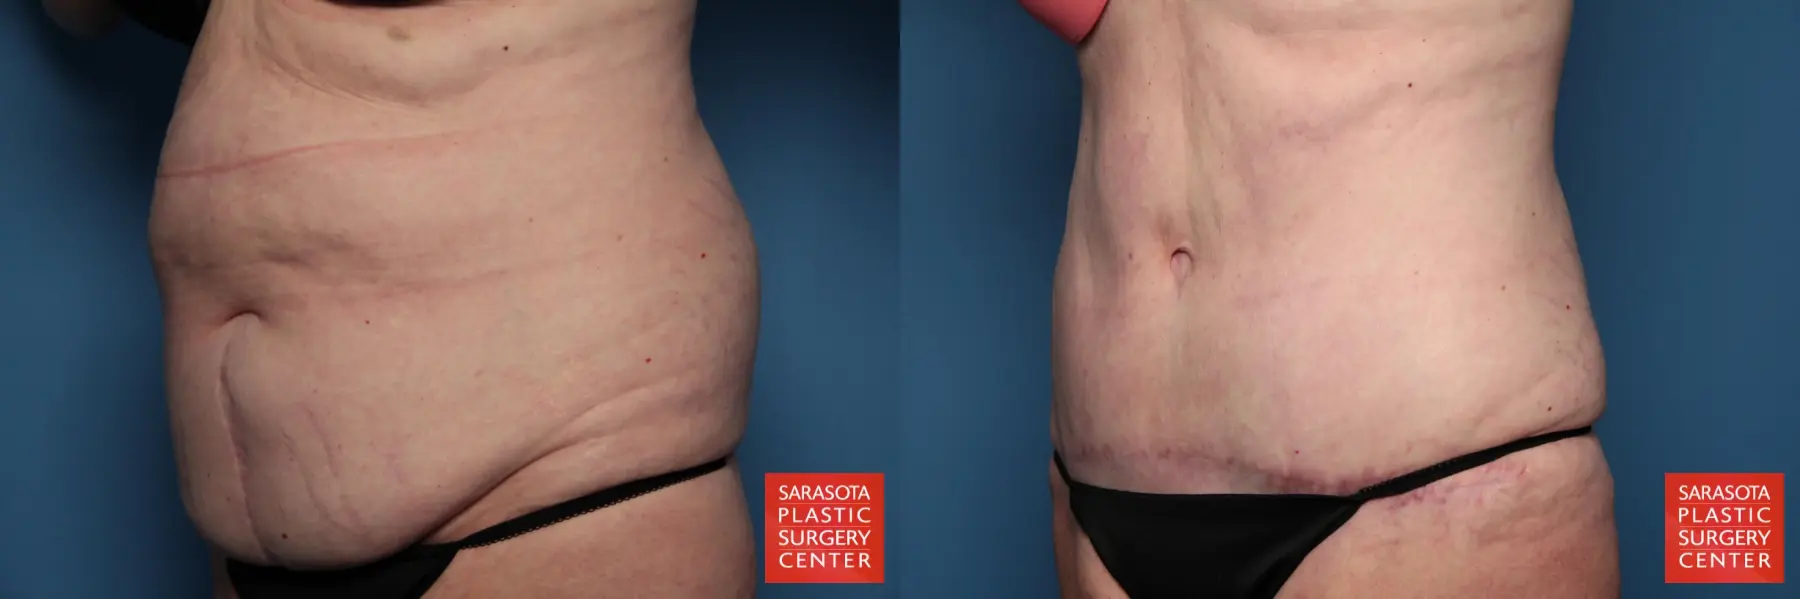 Tummy Tuck: Patient 15 - Before and After 3